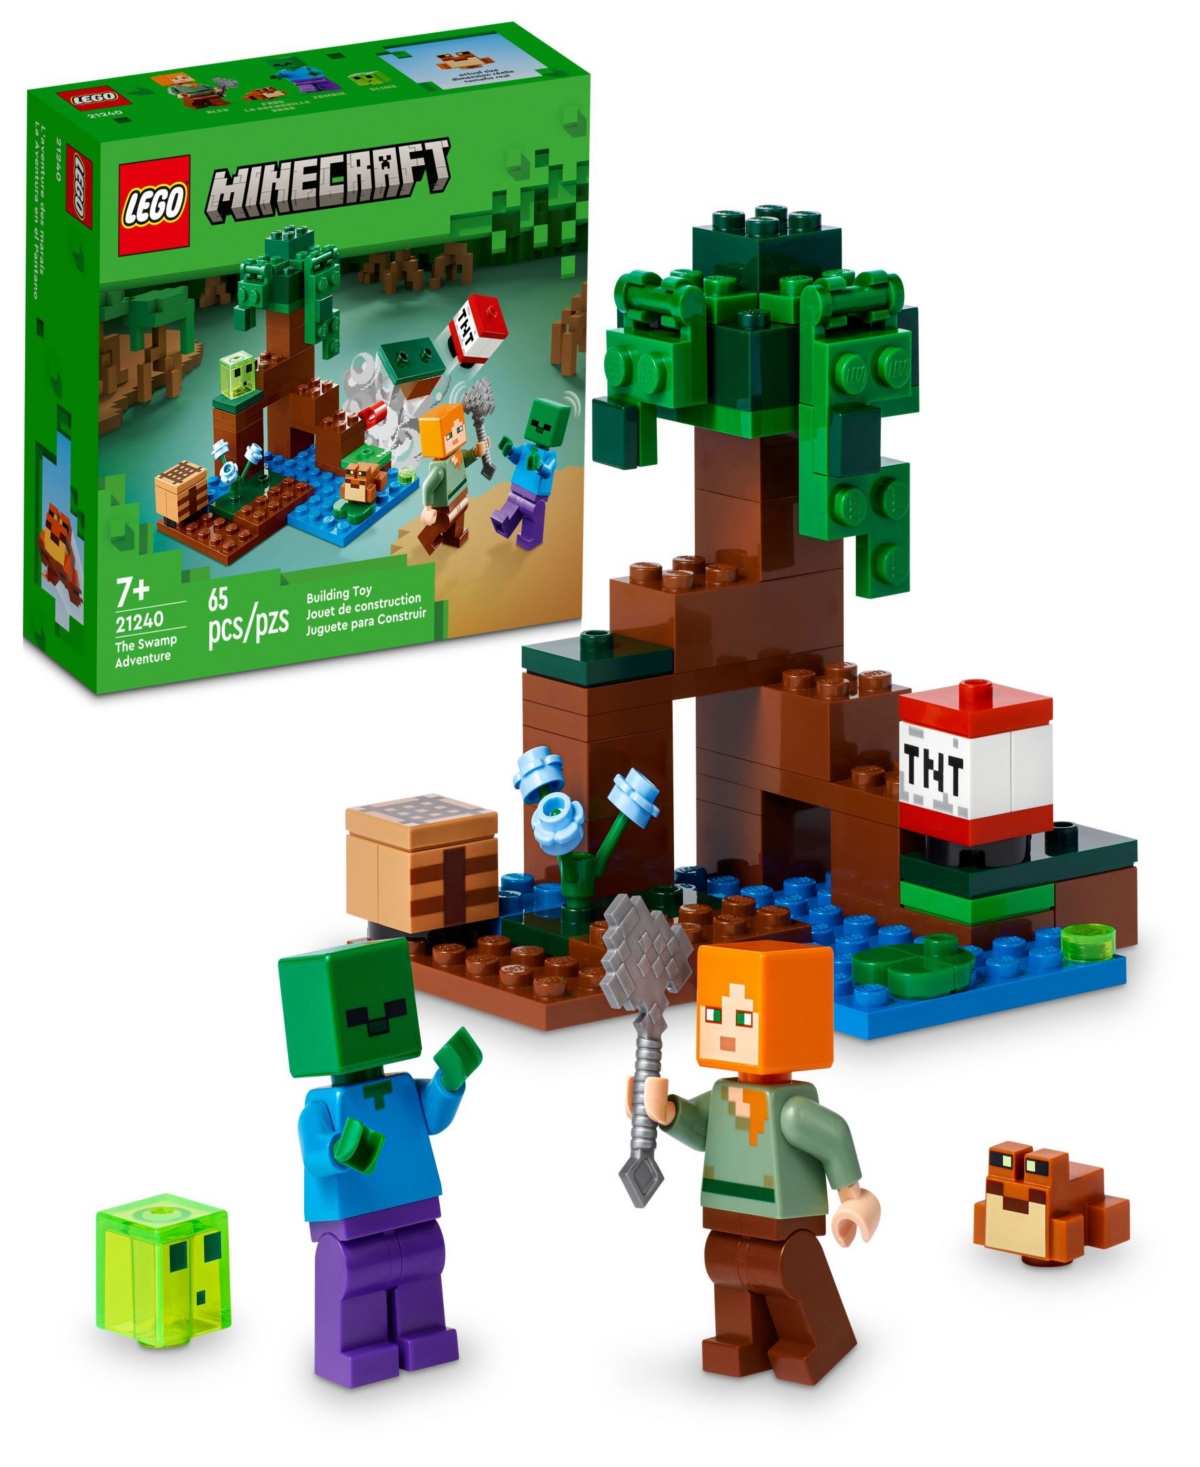 Lego Kids' Minecraft The Swamp Adventure 21240 Toy Building Set With Alex, Zombie, Slime Block And Frog Figures In Multicolor